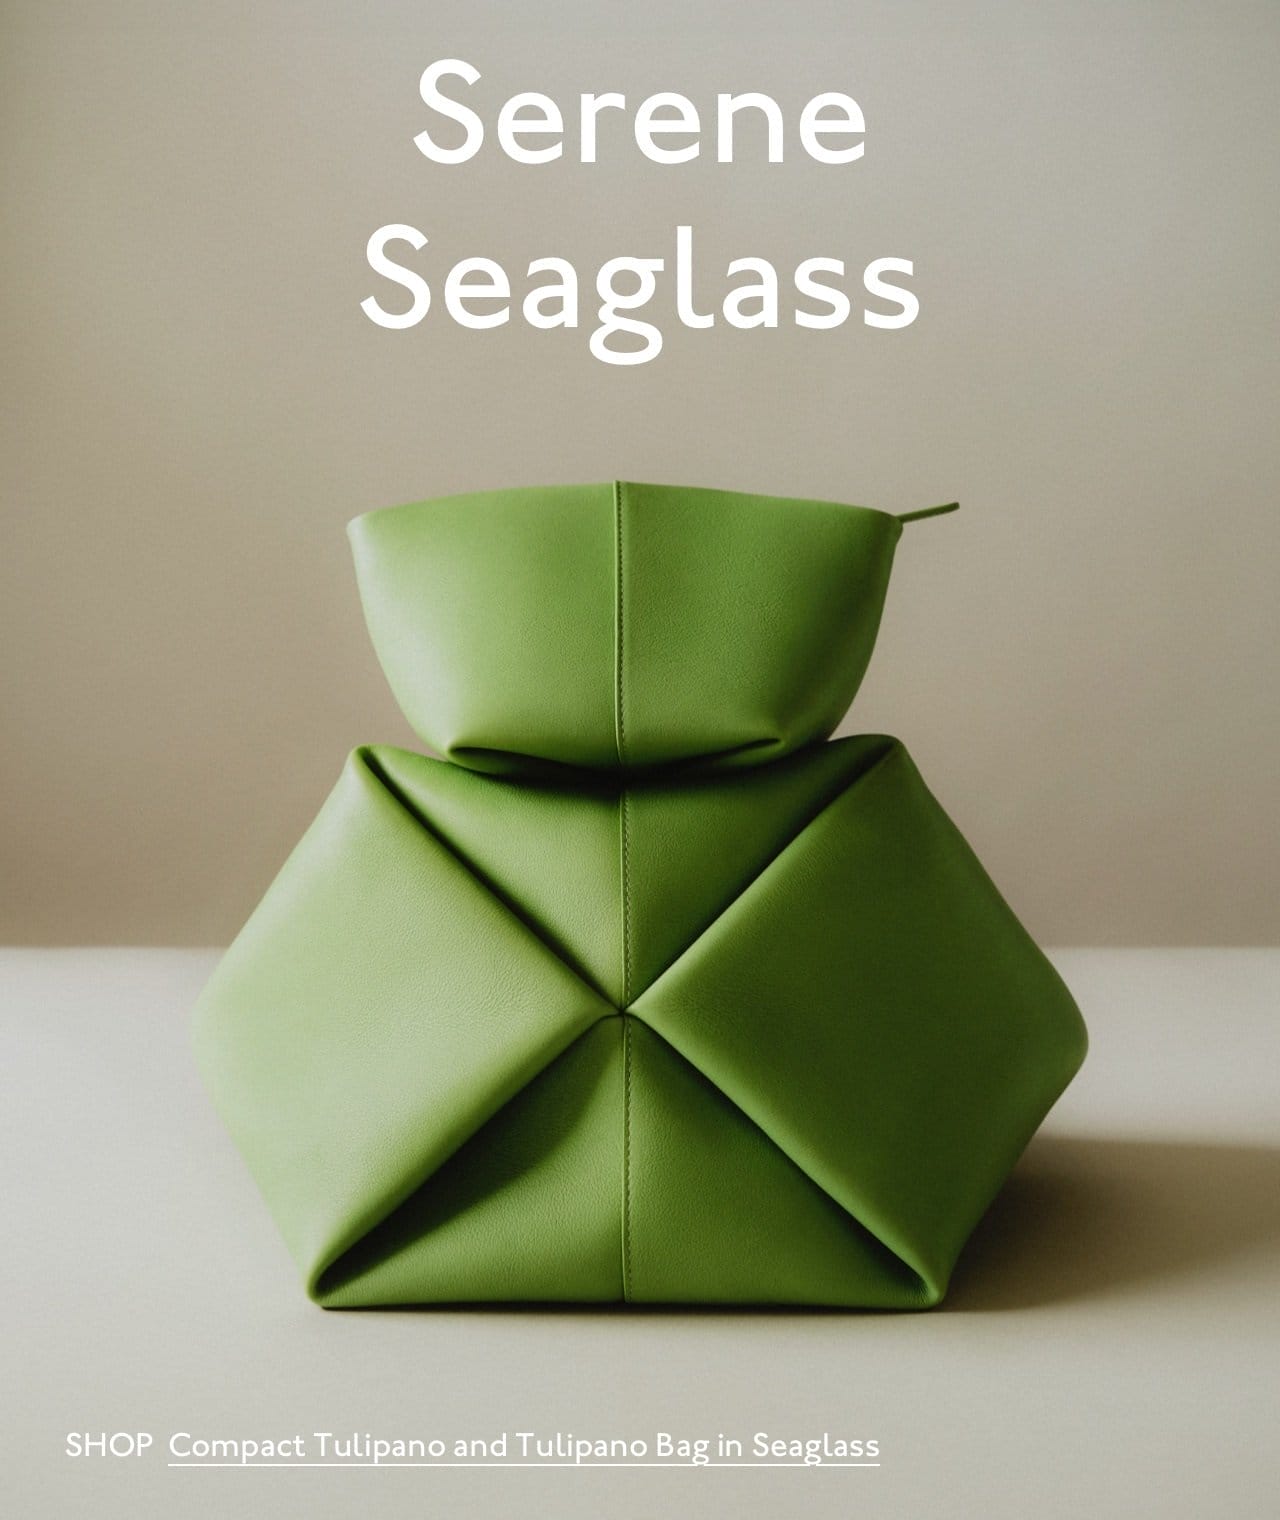 Introducing serene Seaglass. Pictured: Compact Tulipano and Tulipano Bag in Seaglass. Shop now.